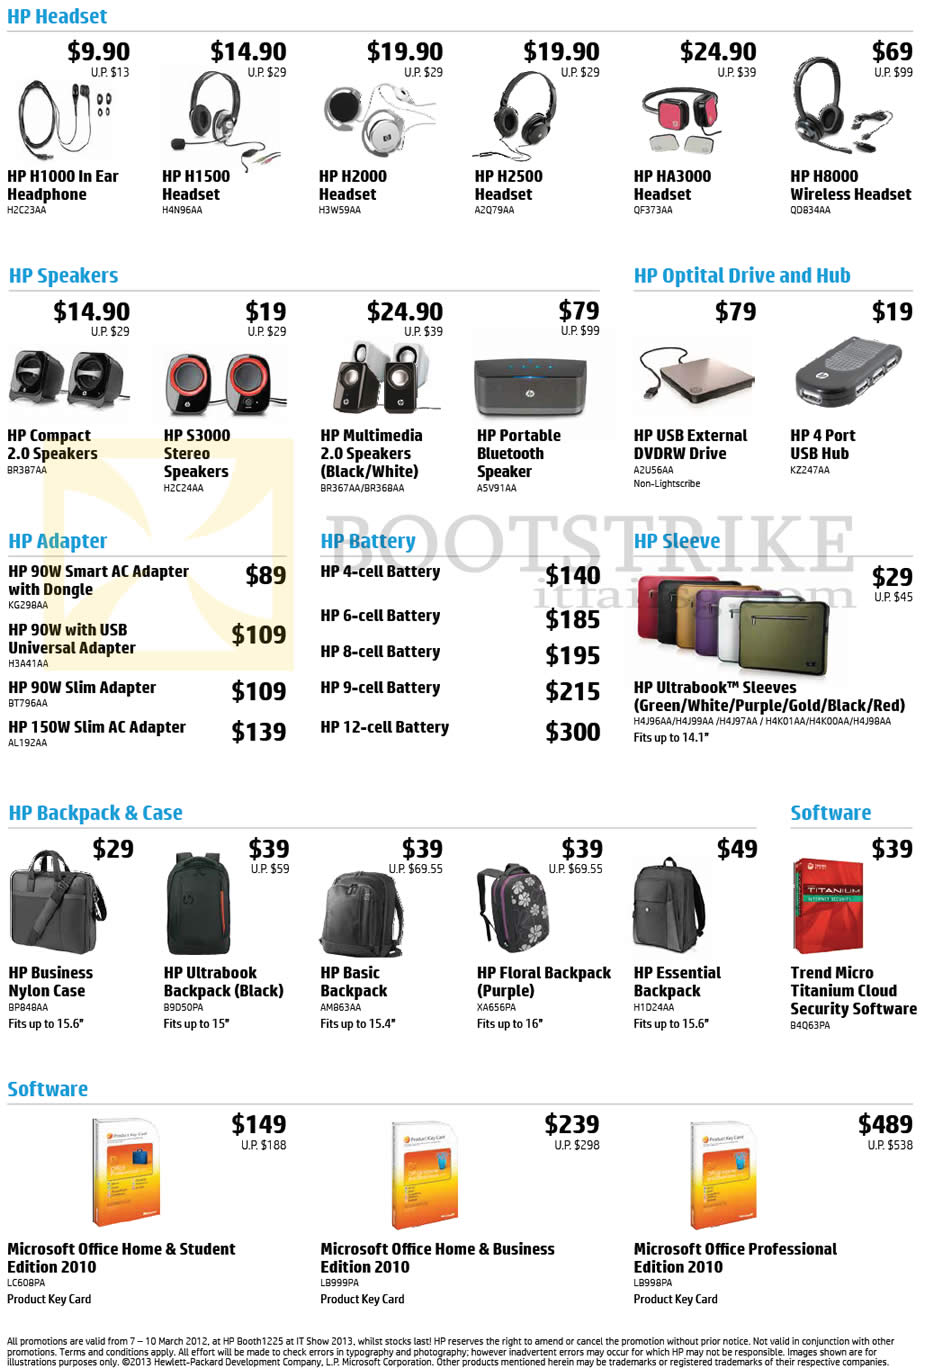 IT SHOW 2013 price list image brochure of HP Accessories Headsets, Speakers, Optical Drive, Adapters, Batteries, Software, Backpacks